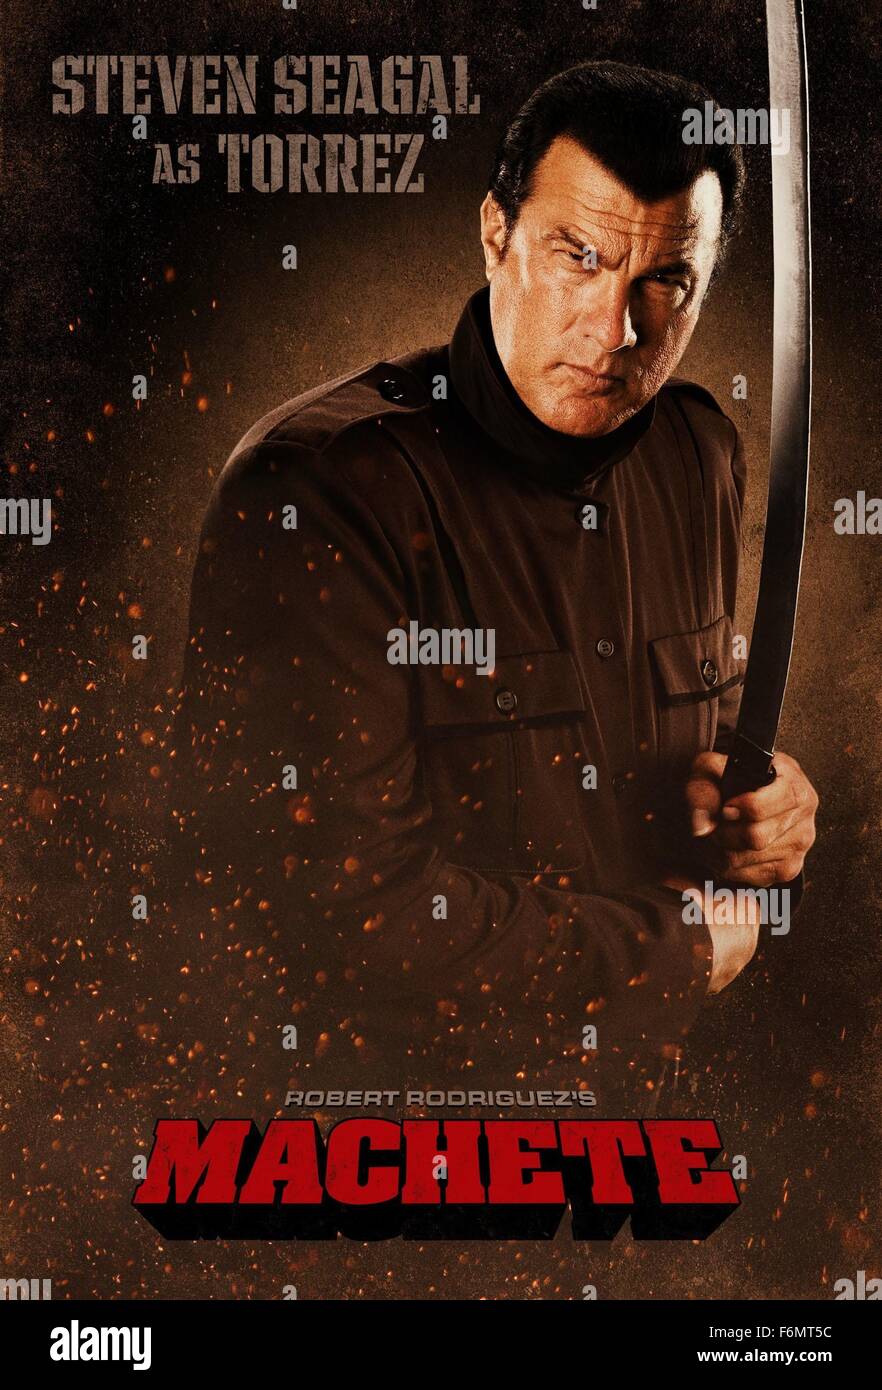 RELEASE DATE: 3 September 2010. TITLE: Machete. STUDIO: Troublemaker  Studios. PLOT: After being betrayed by the organization who hired him, an  ex-Federale launches a brutal rampage of revenge against his former boss.